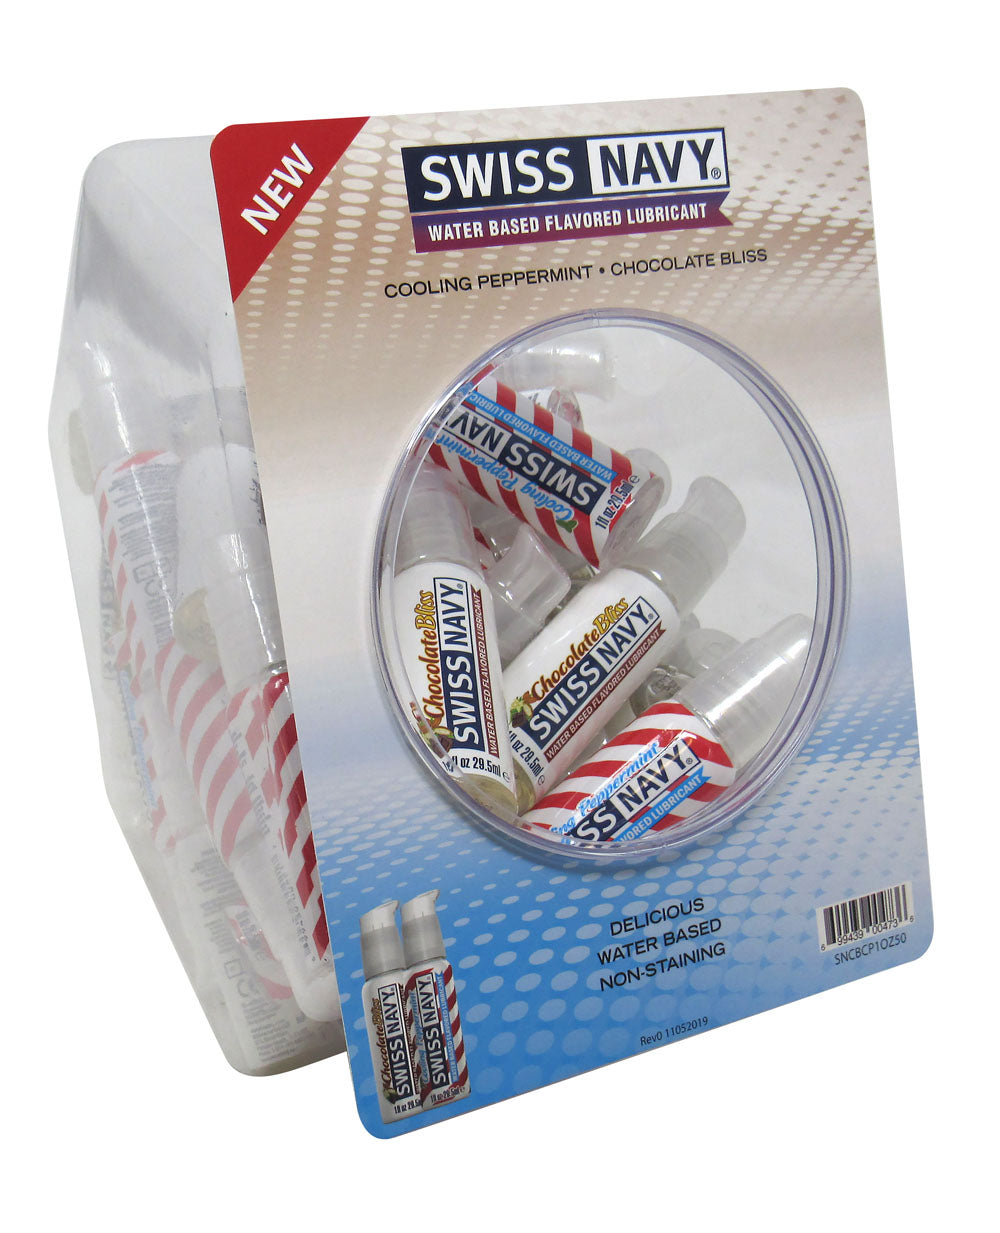 Swiss Navy Chocolate and Pepermint 1oz 50pc Fishbowl MD-SNCBCP1O50